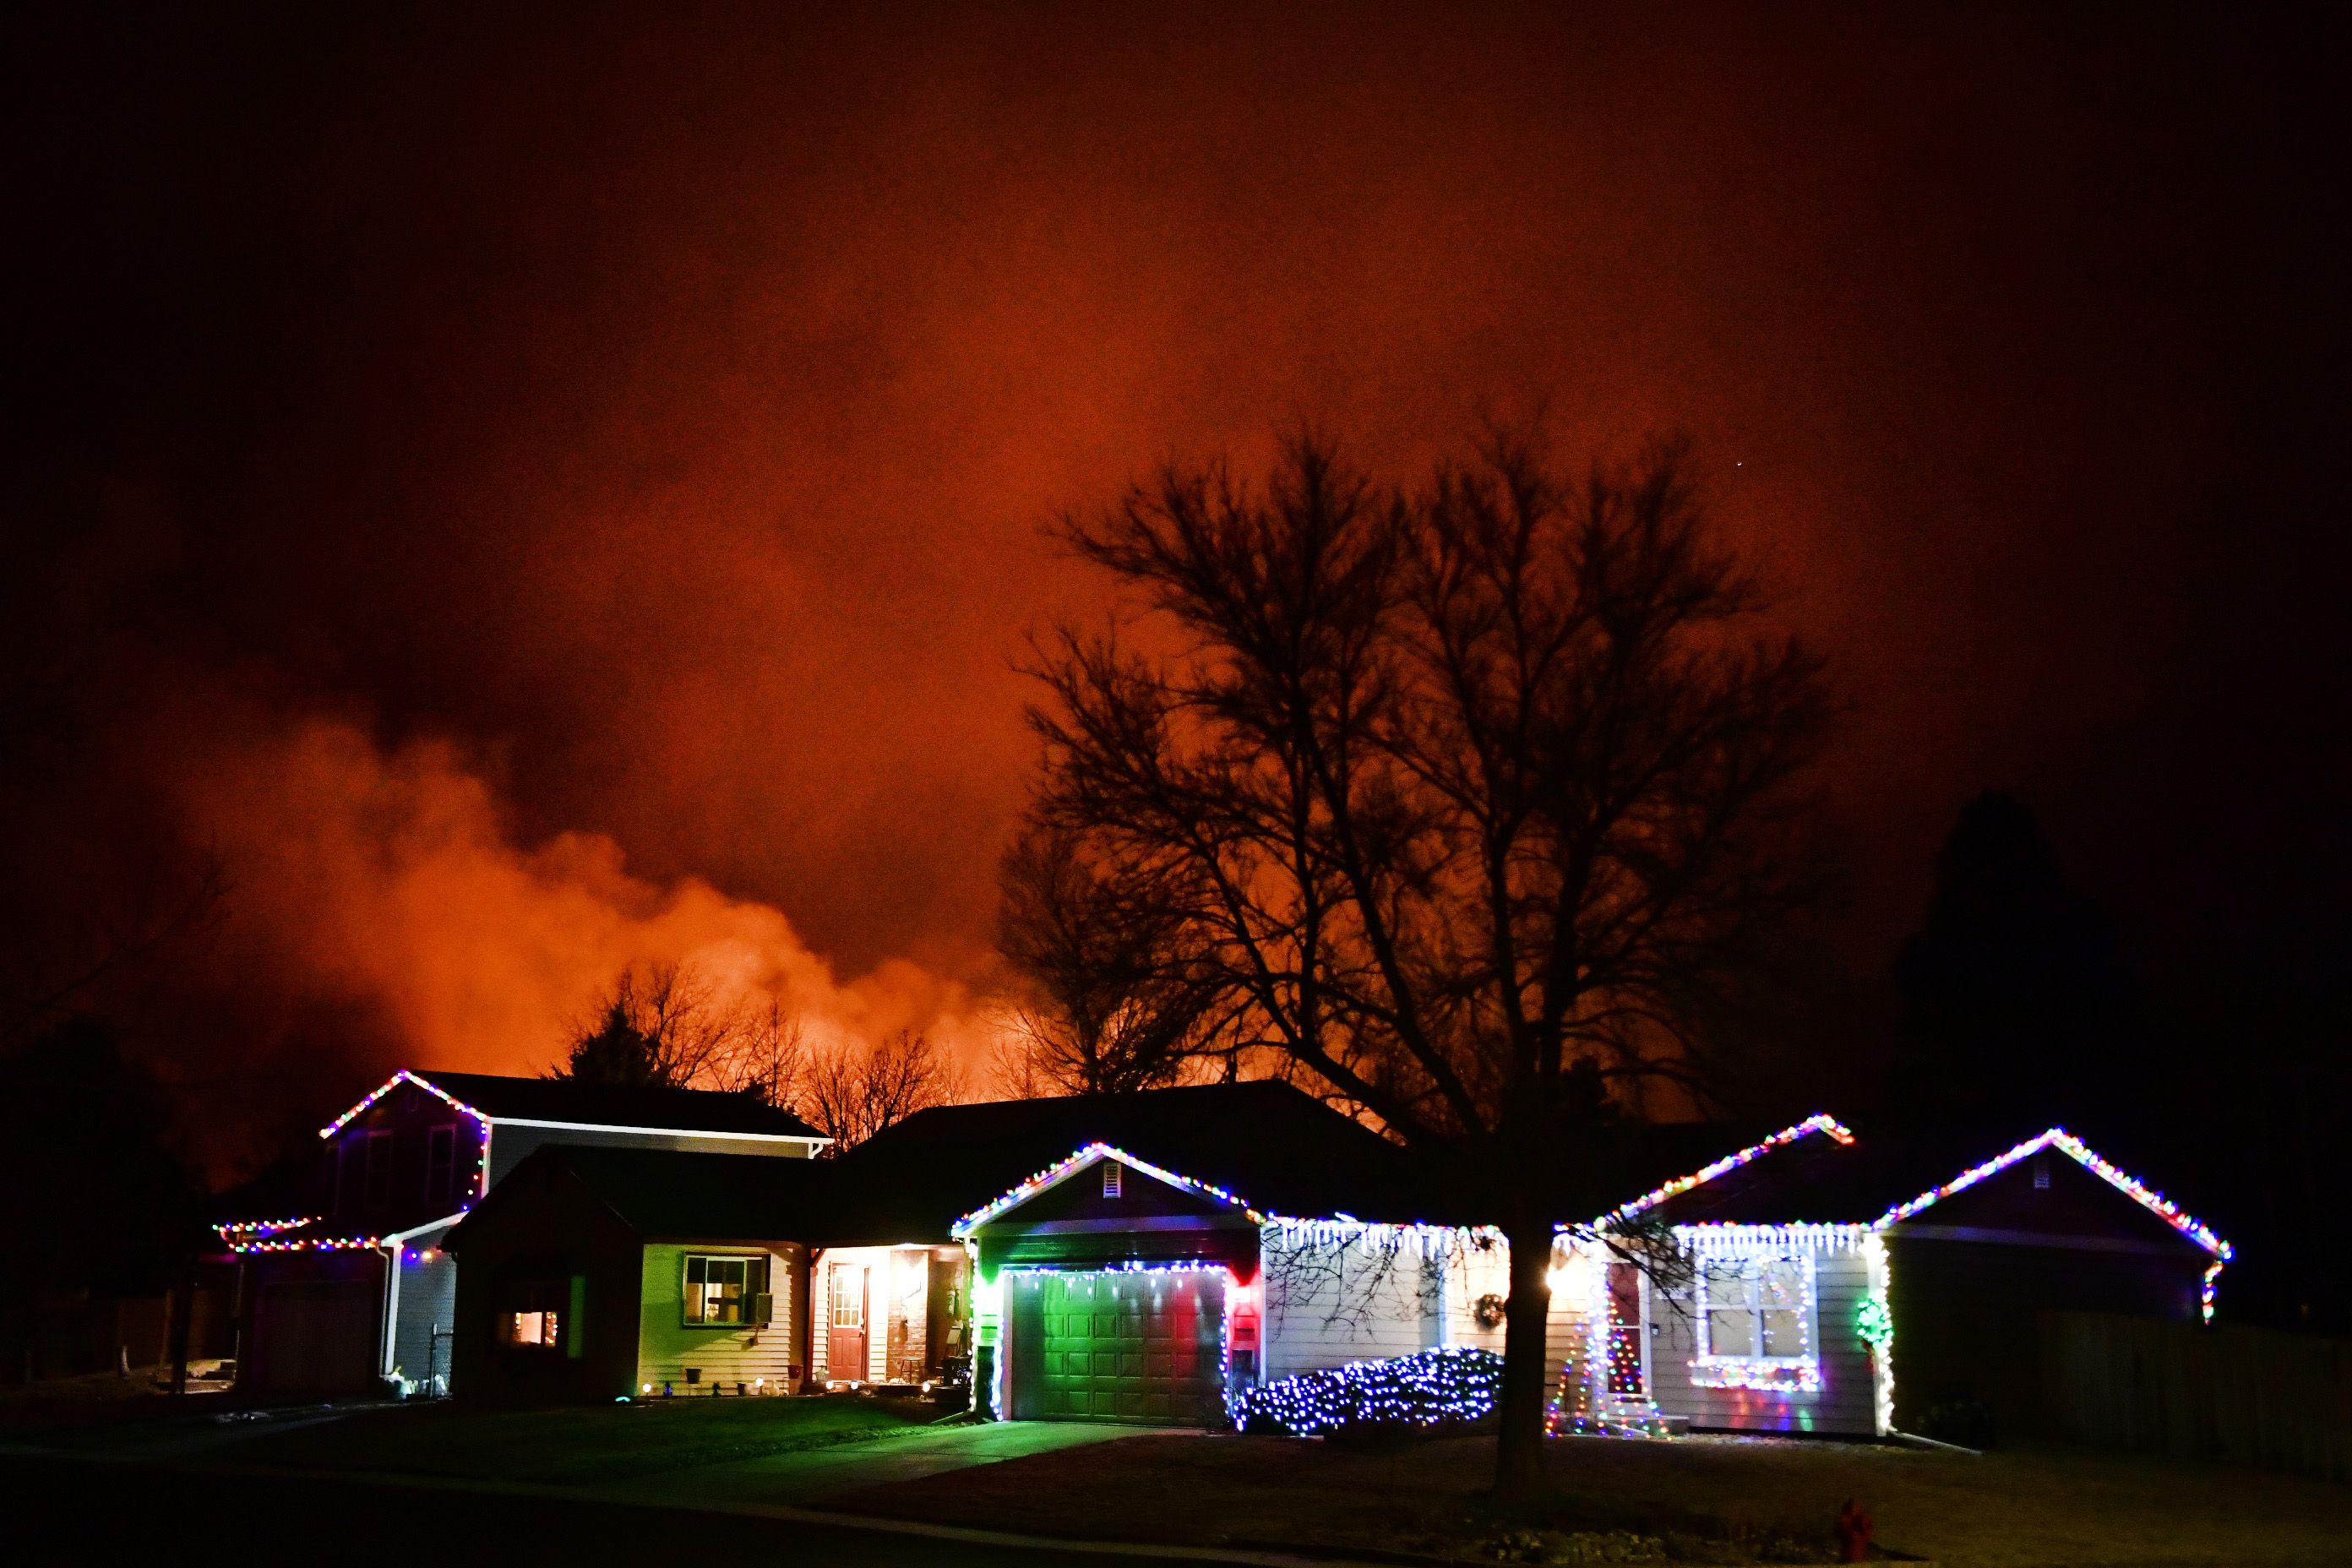 Christmas lights adorn a house as fires rage in the background.